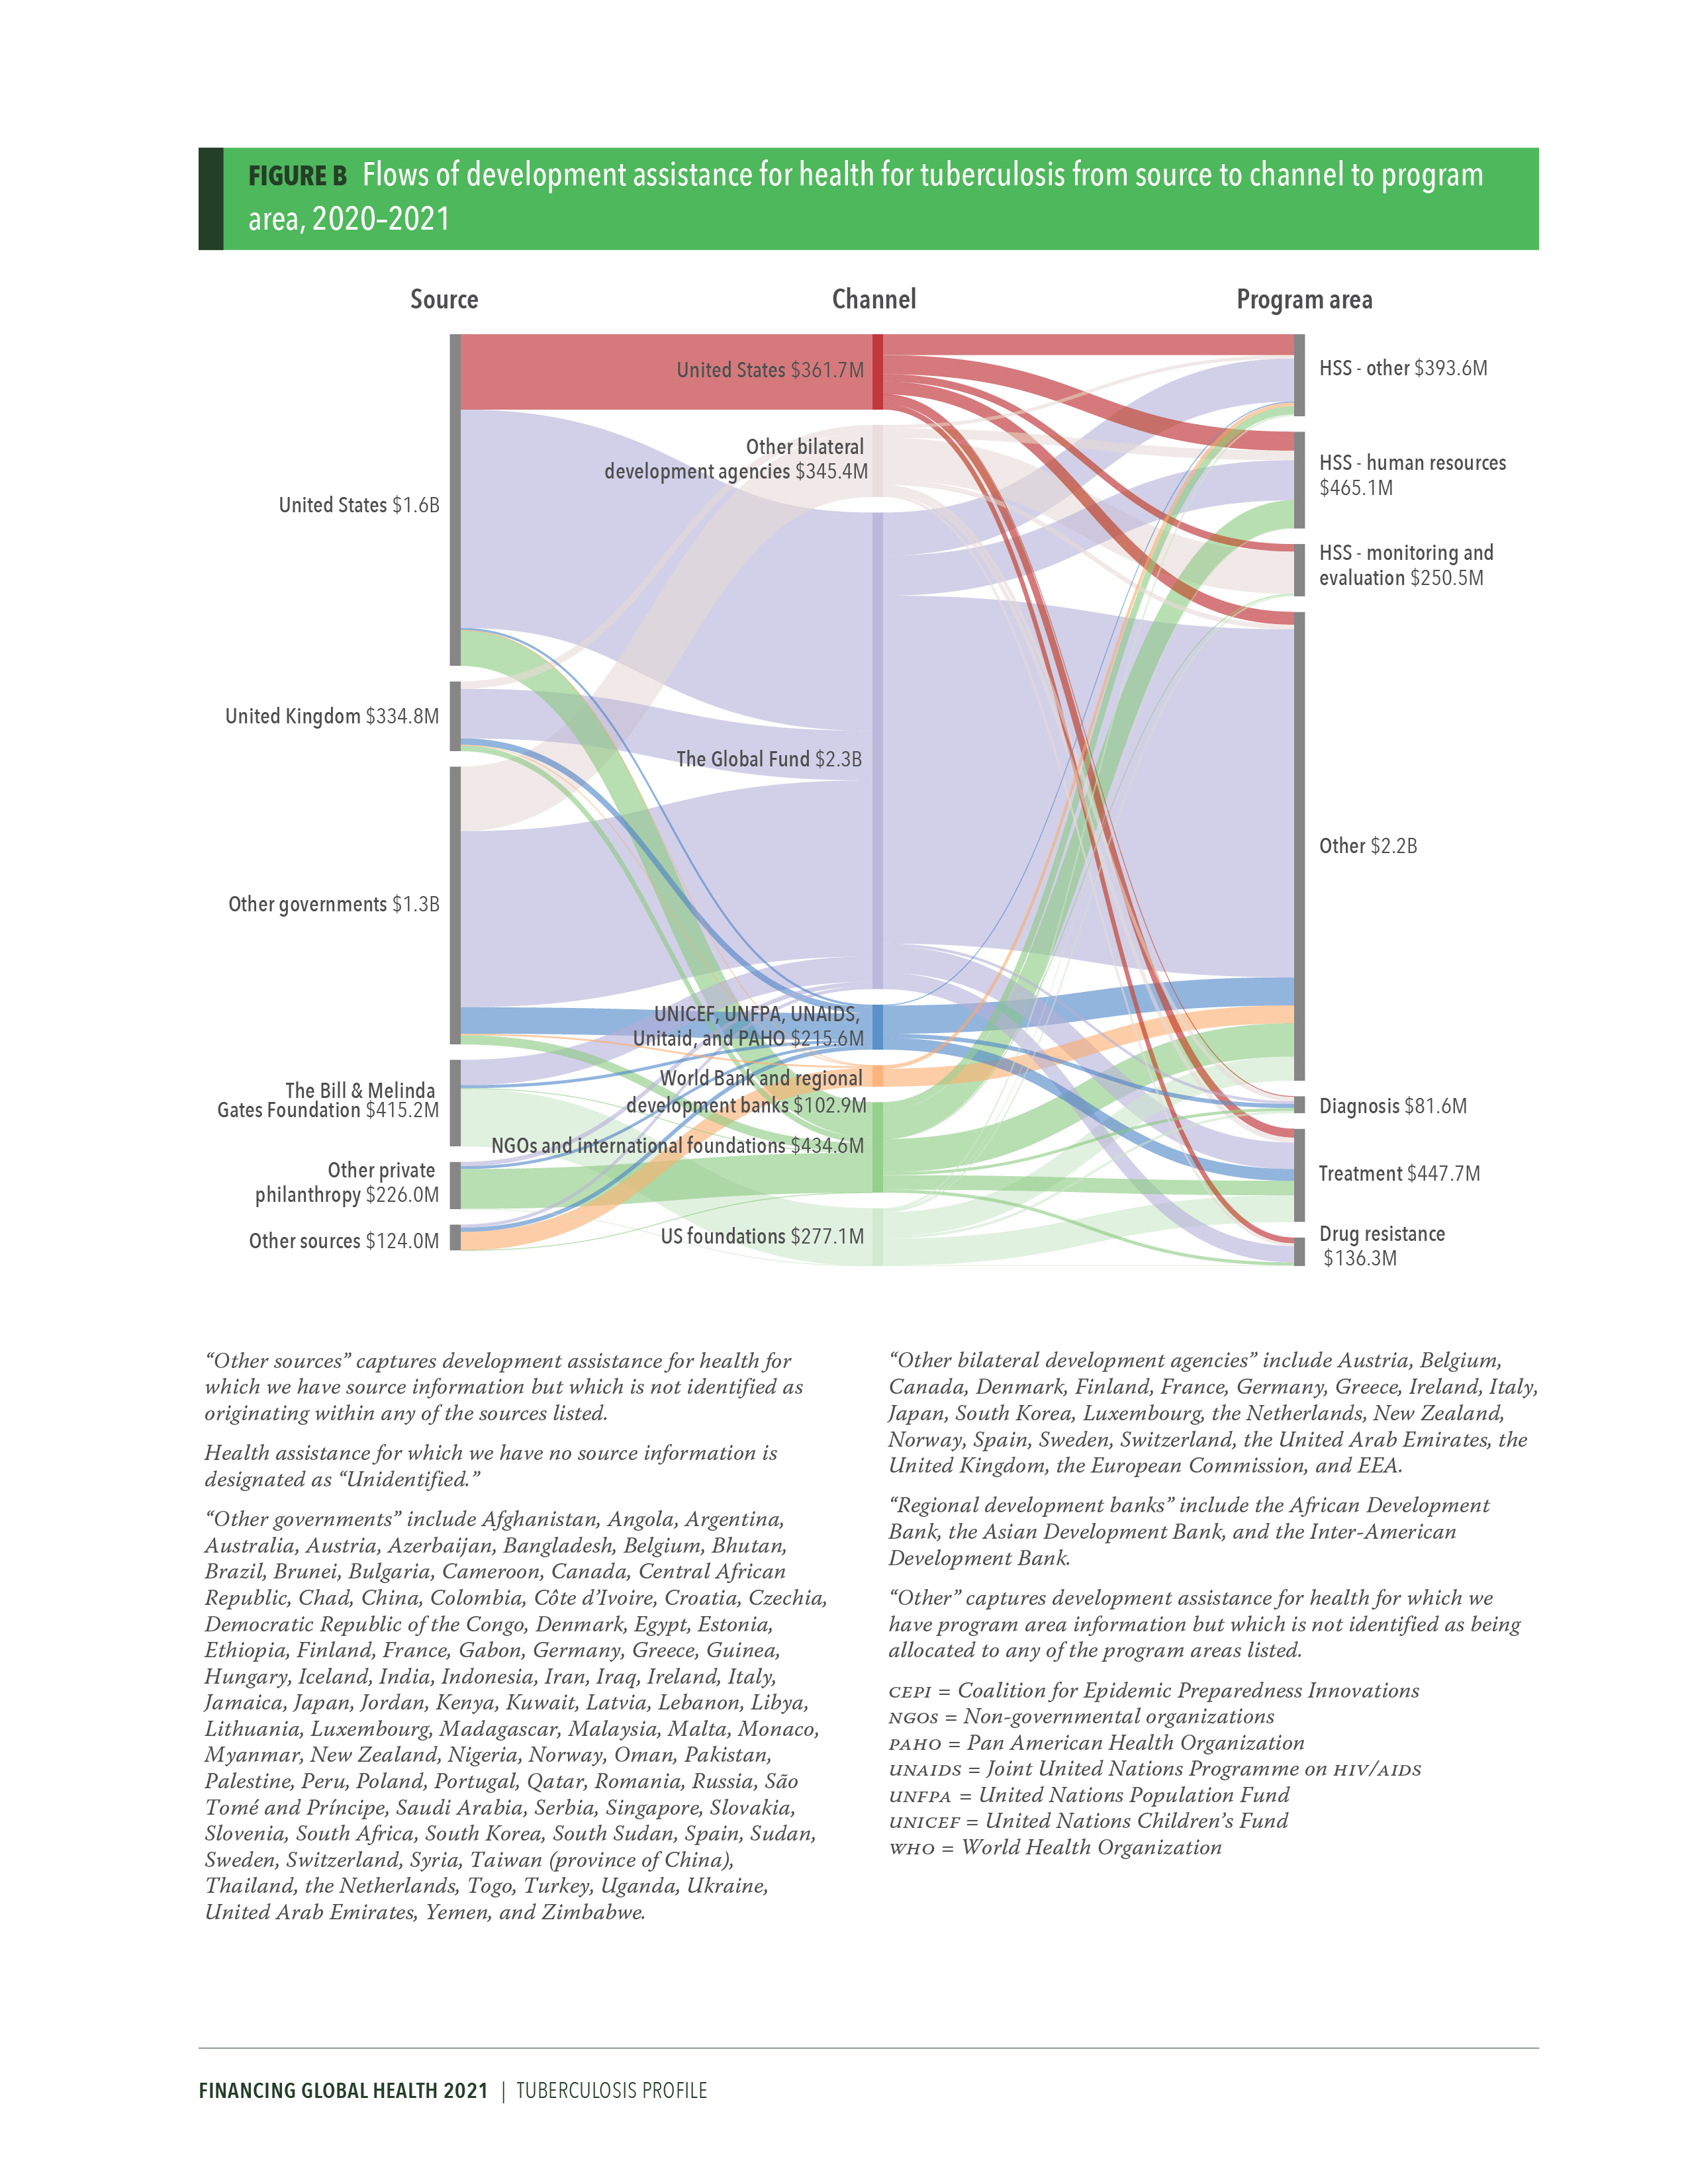 Disease spending profile for tuberculosis: page 2 shows a diagram of flows of development assistance for health from source to channel to program area. Download the profile for more details. 